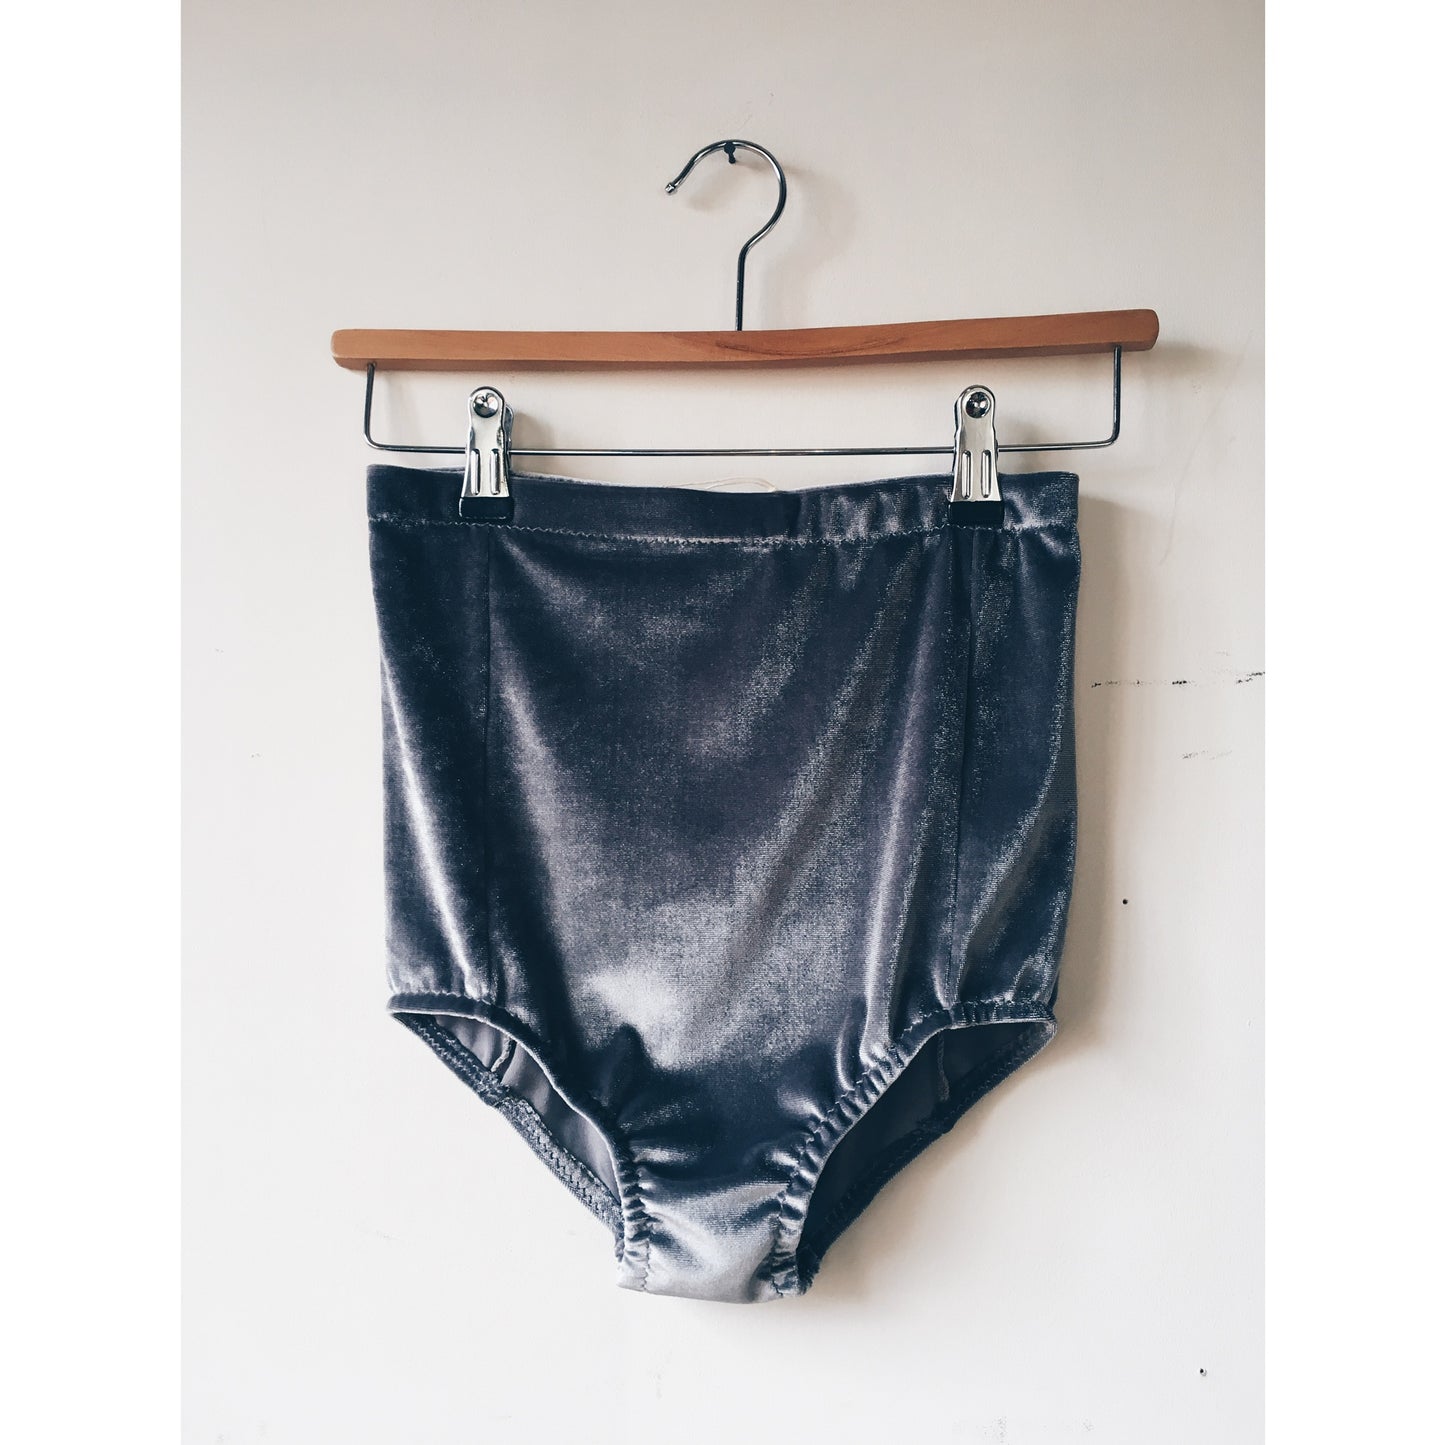 grey velvet high waisted 'booty' shorts on a wooden hanger against a white wall